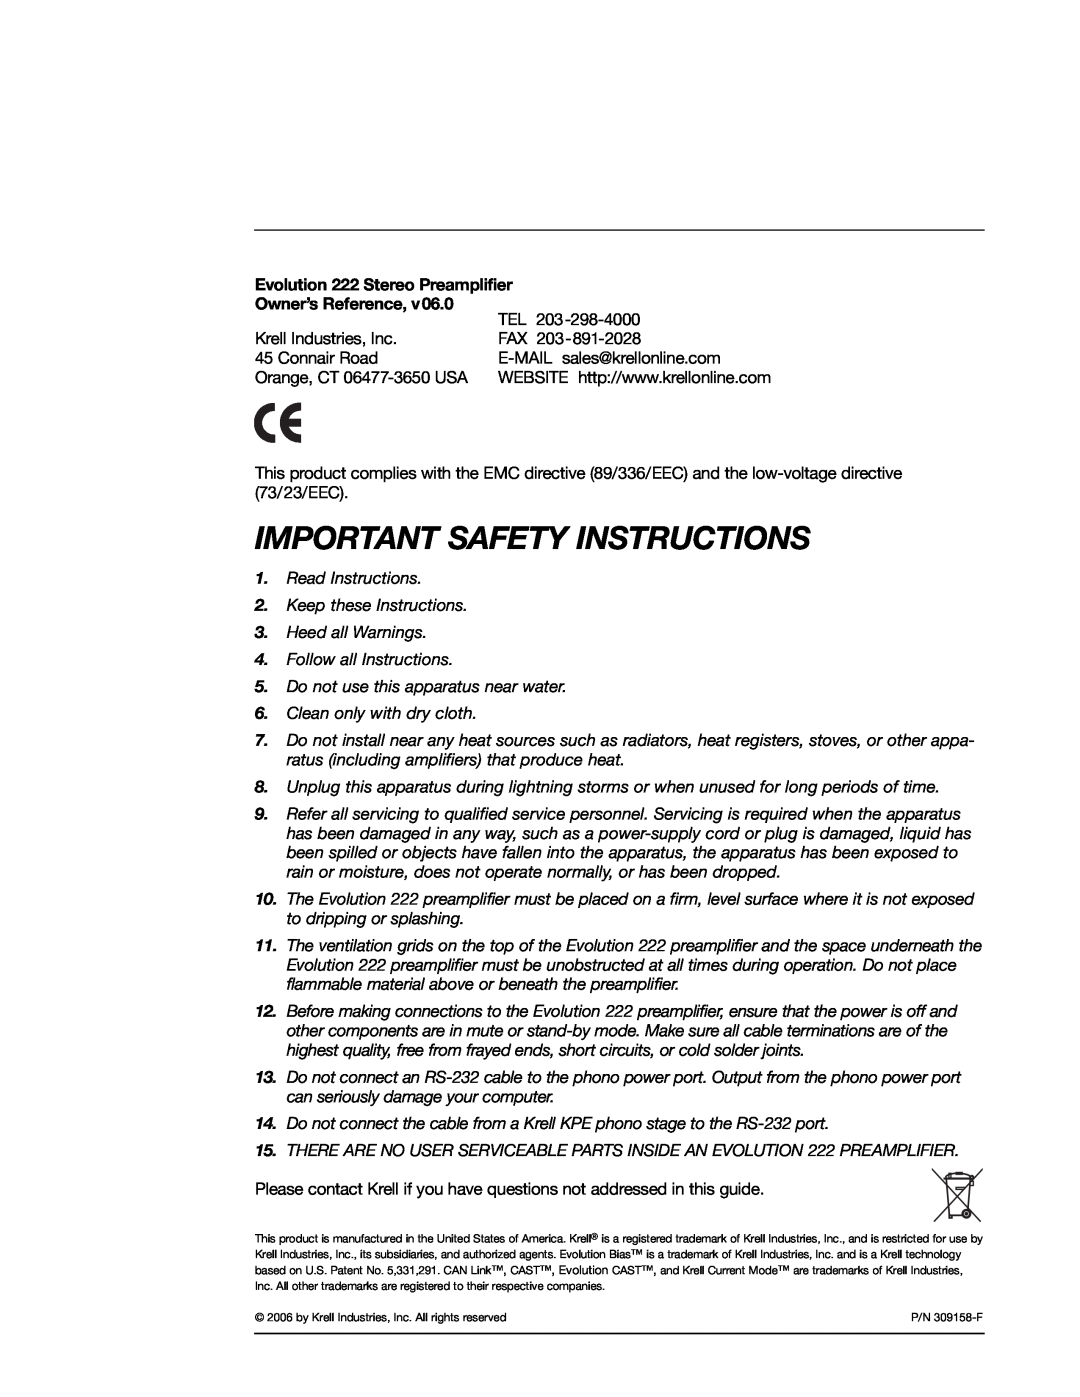 Evolution Technologies manual Important Safety Instructions, Evolution 222 Stereo Preamplifier, Owner’s Reference 